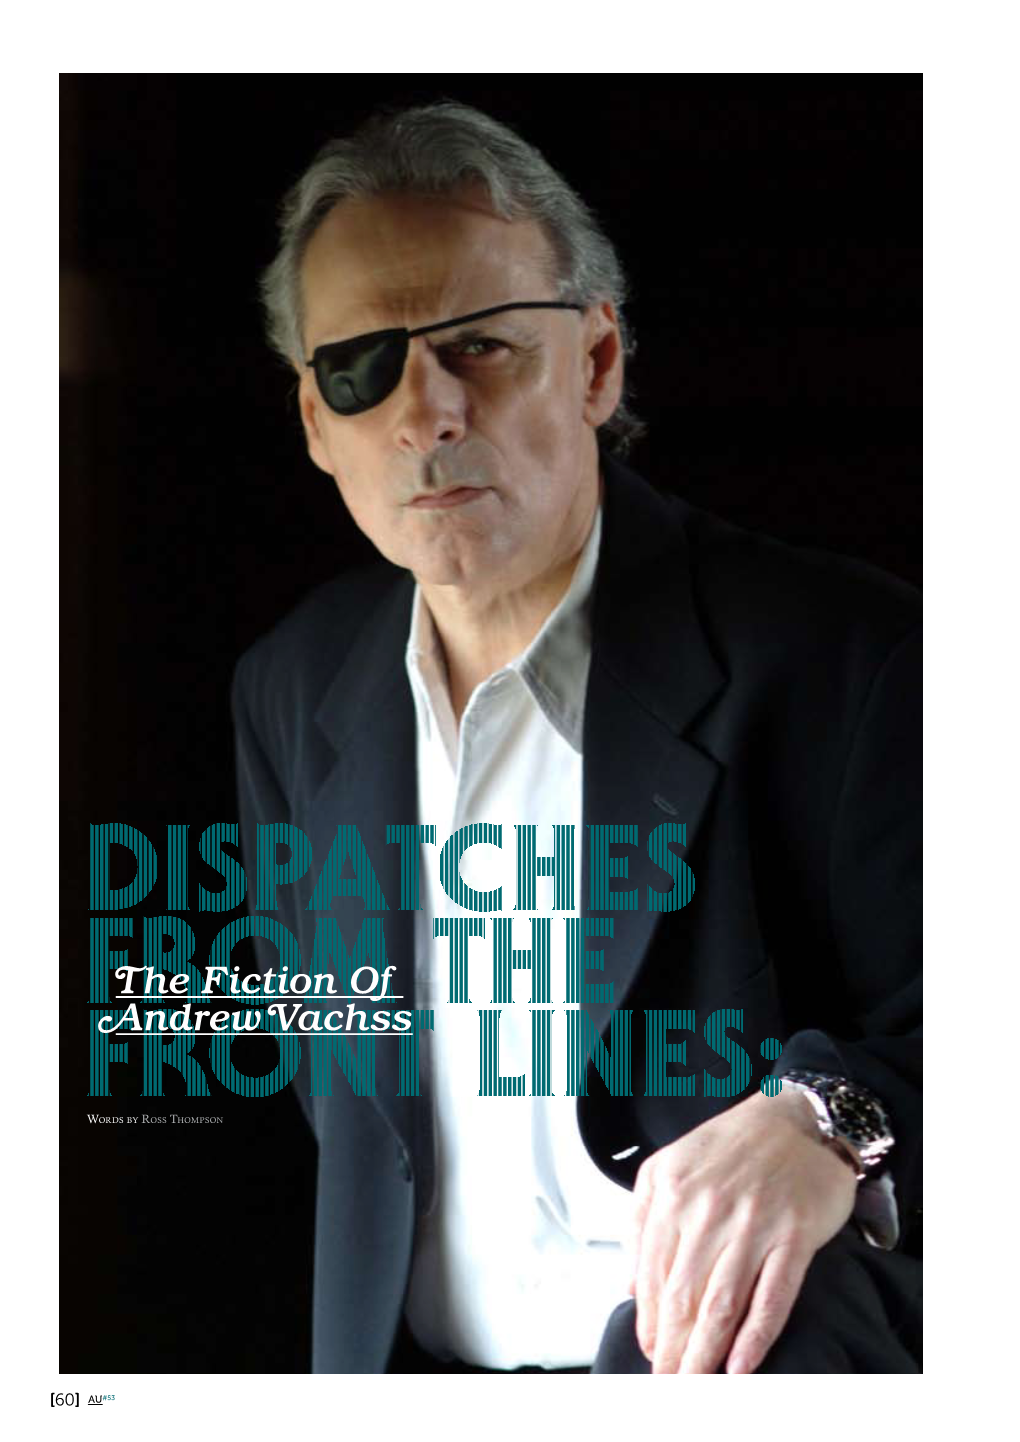 The Fiction of Andrew Vachss